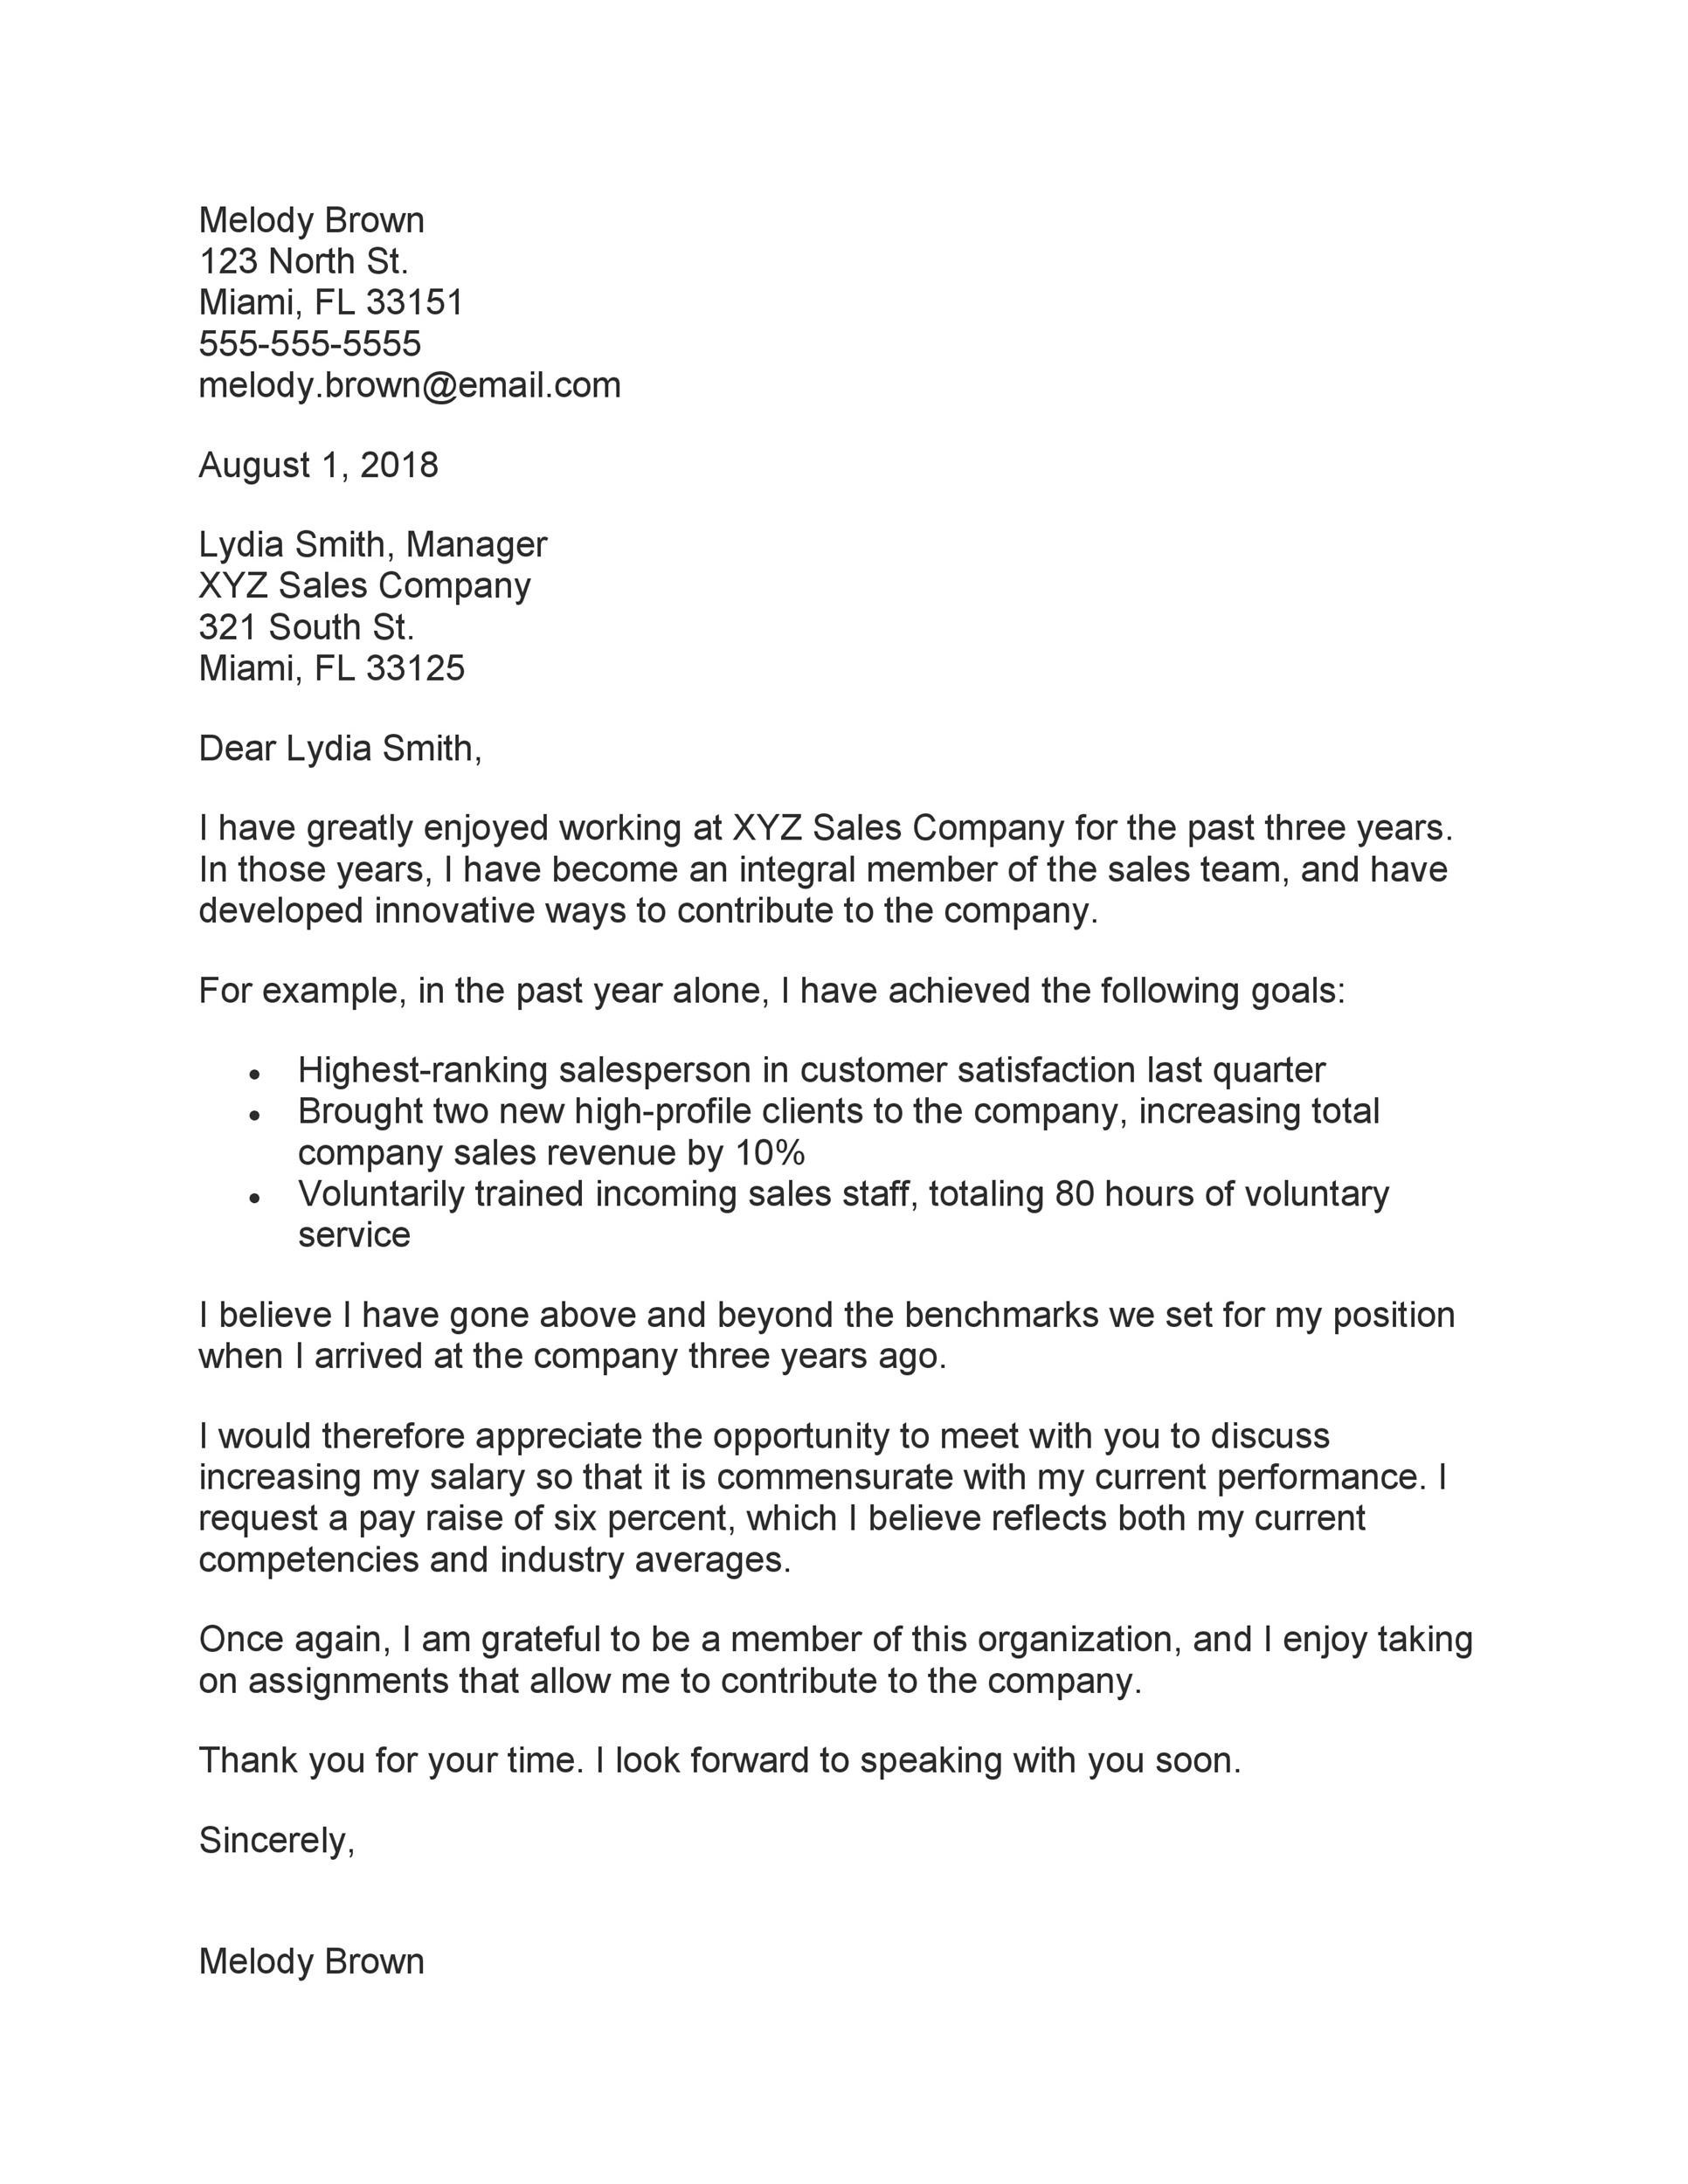 Sample Letter Asking For A Raise from templatelab.com